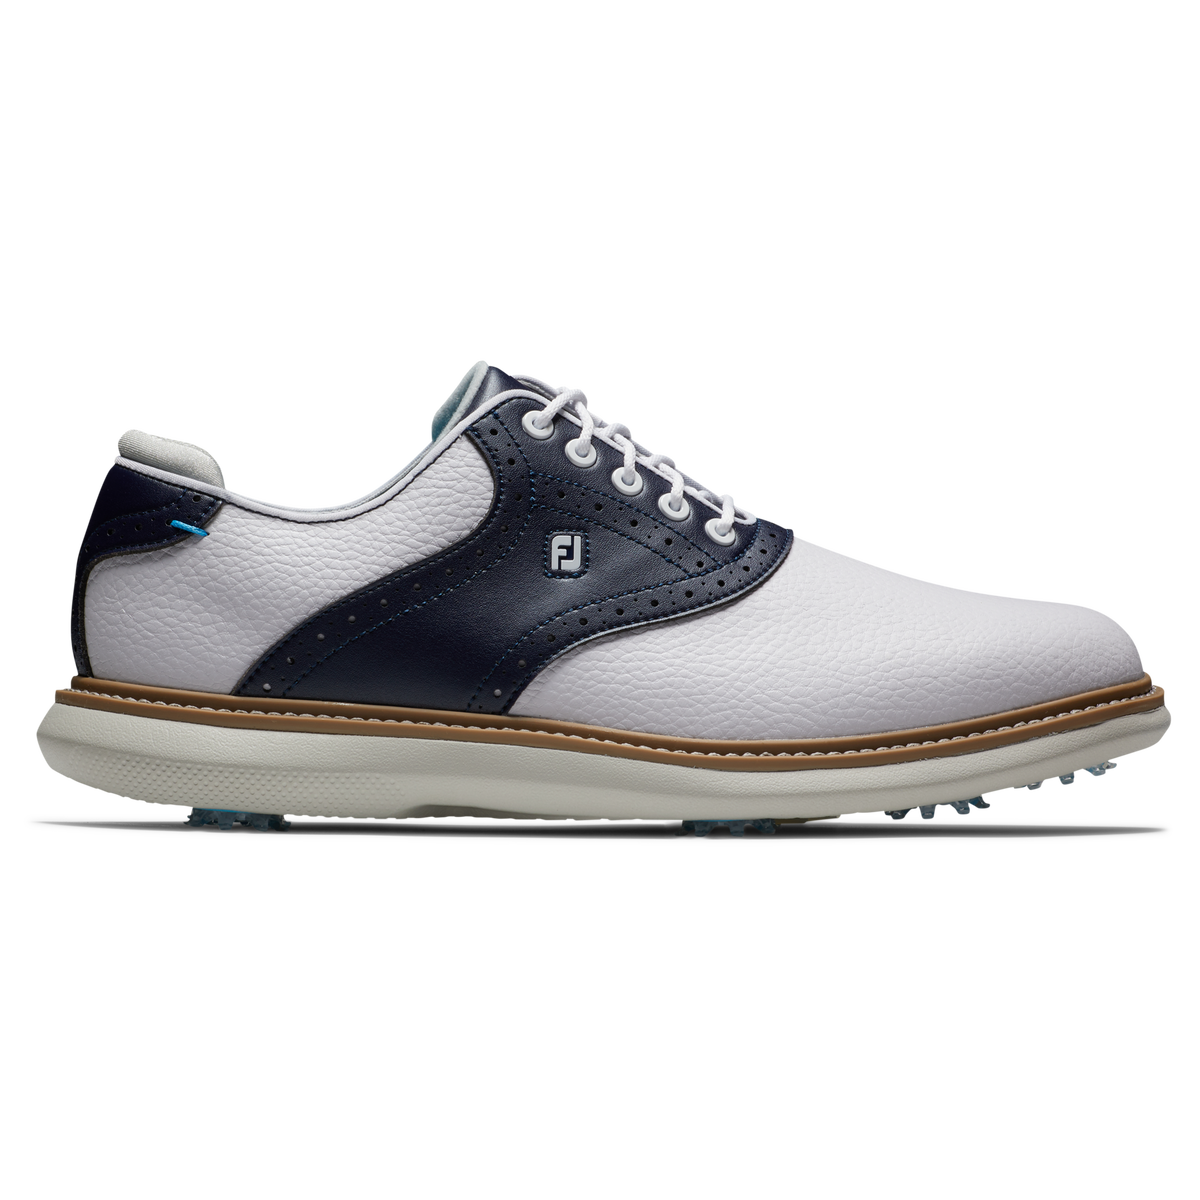 Mens　Shoe　FootJoy　9.5　Golf　Traditions　WhiteWhiteNavy　Spikeless　X-Wide-